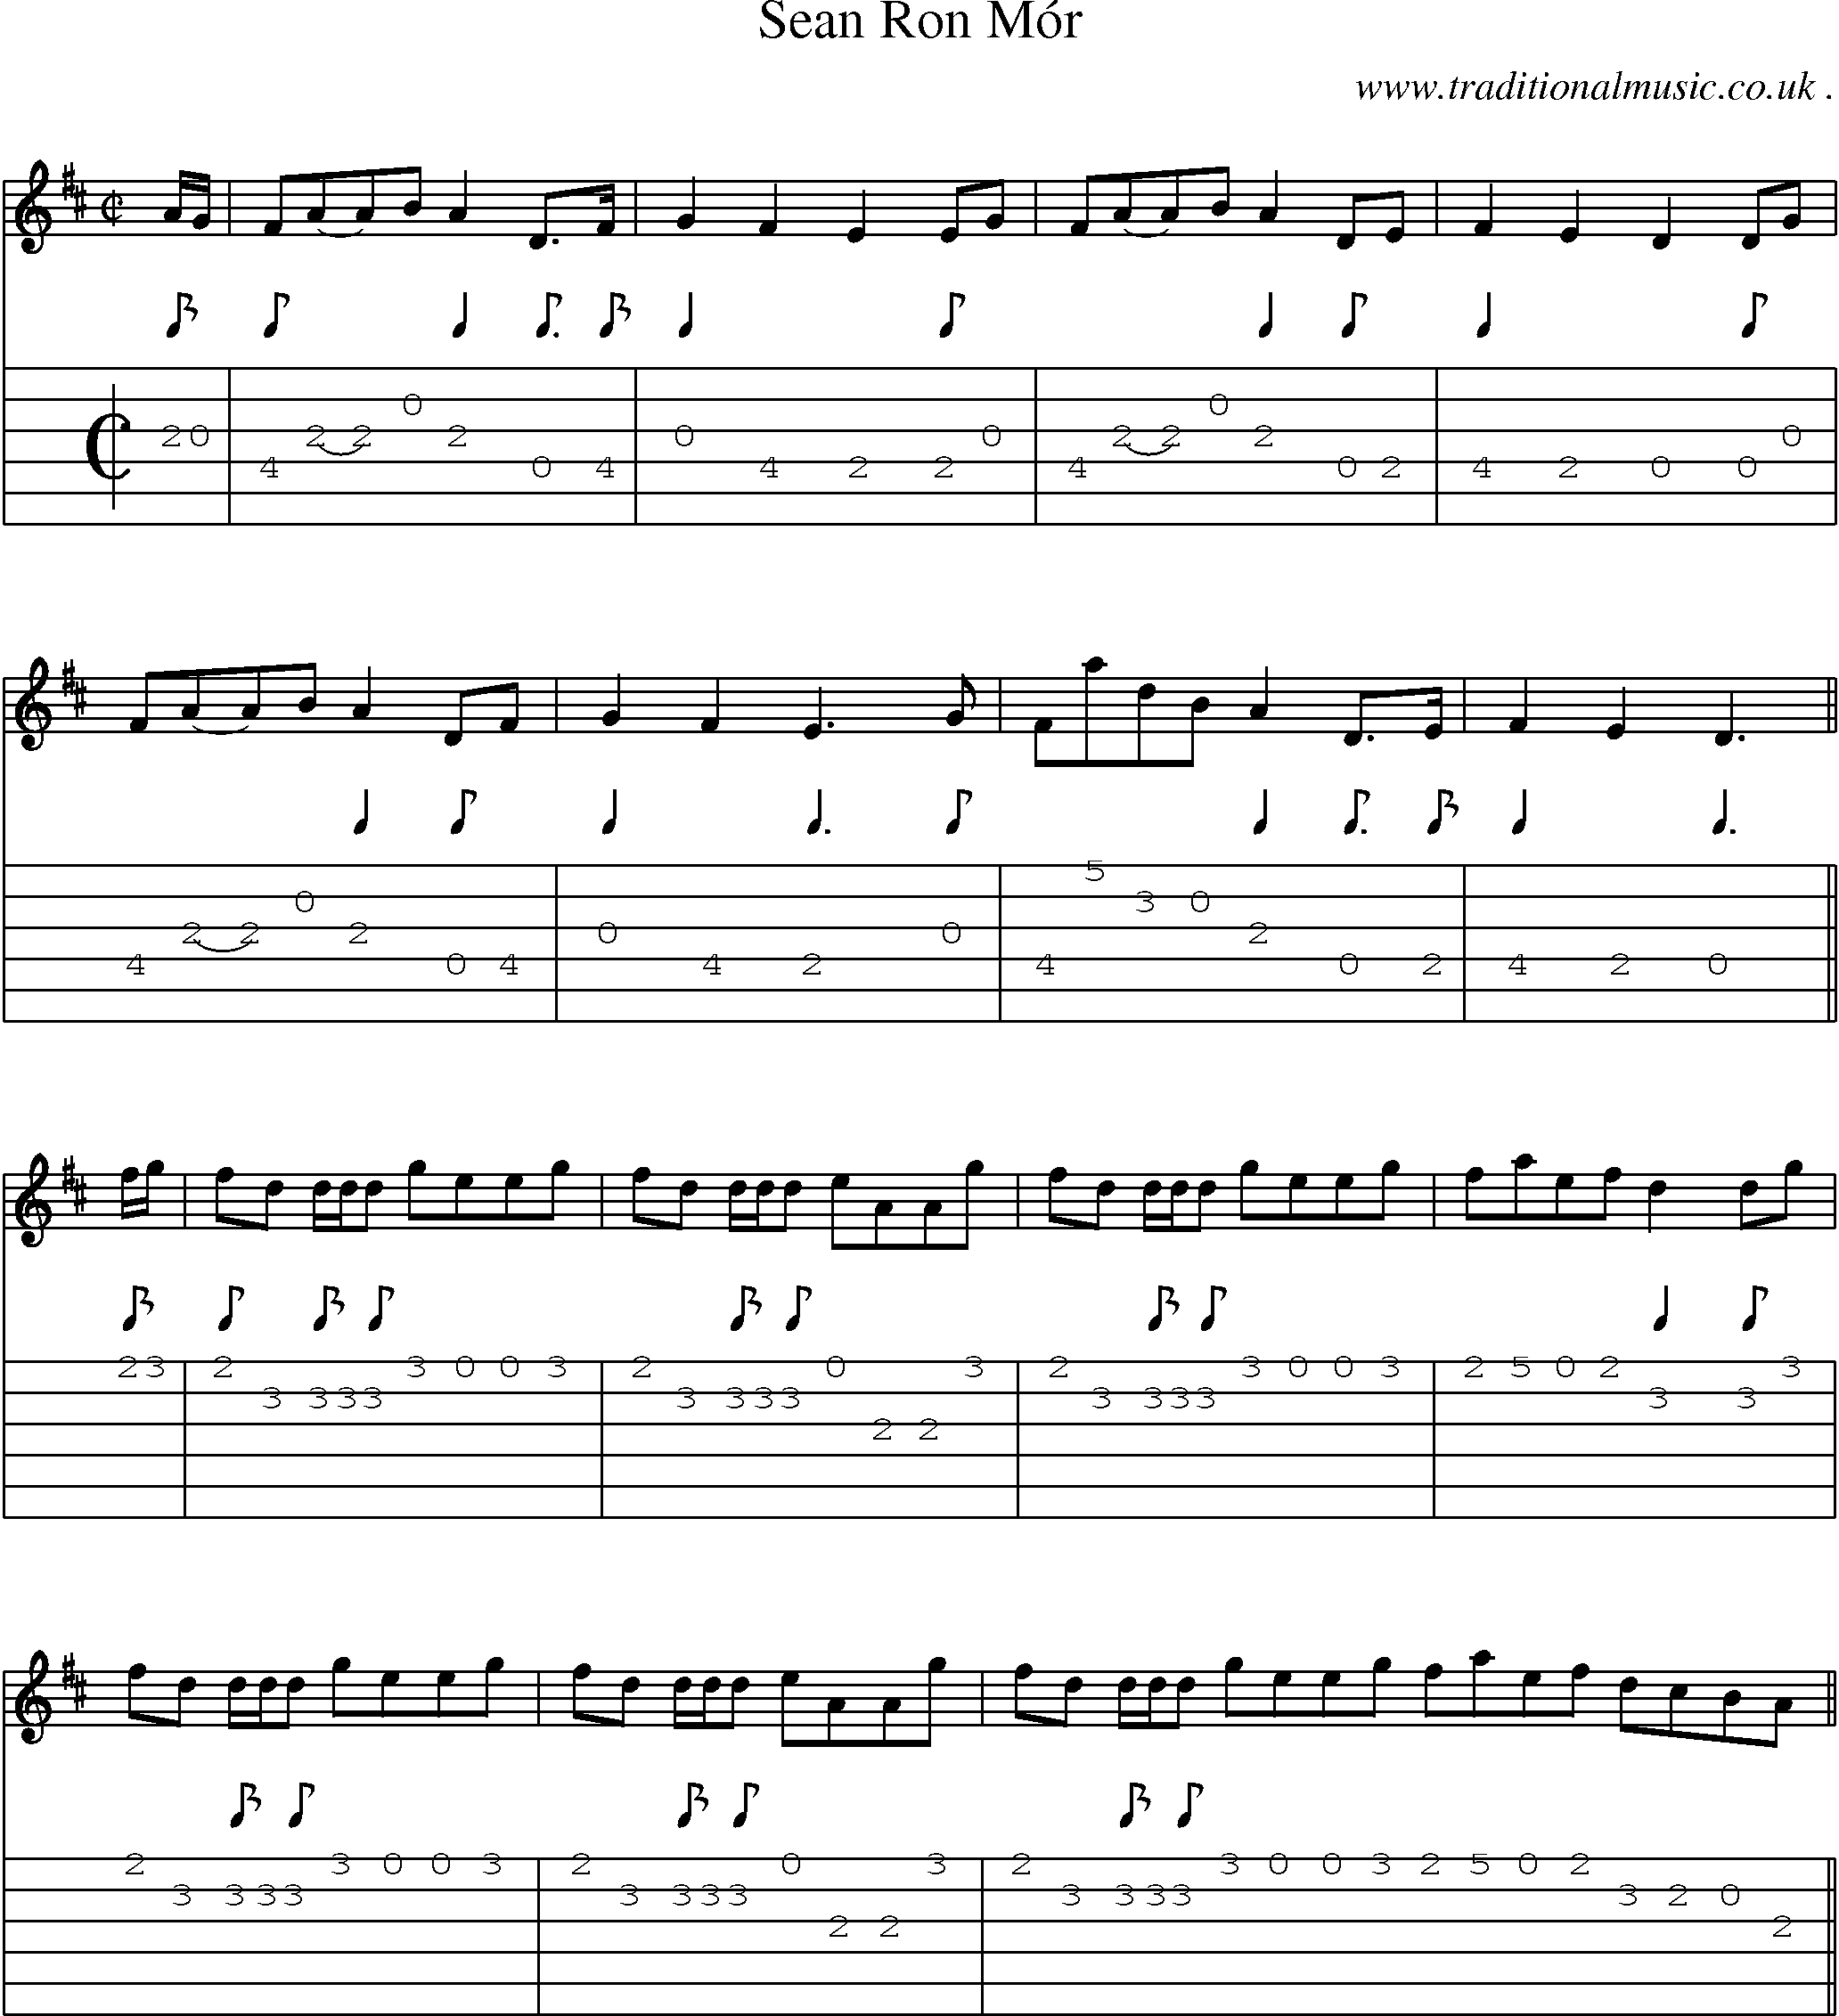 Sheet-music  score, Chords and Guitar Tabs for Sean Ron Mor